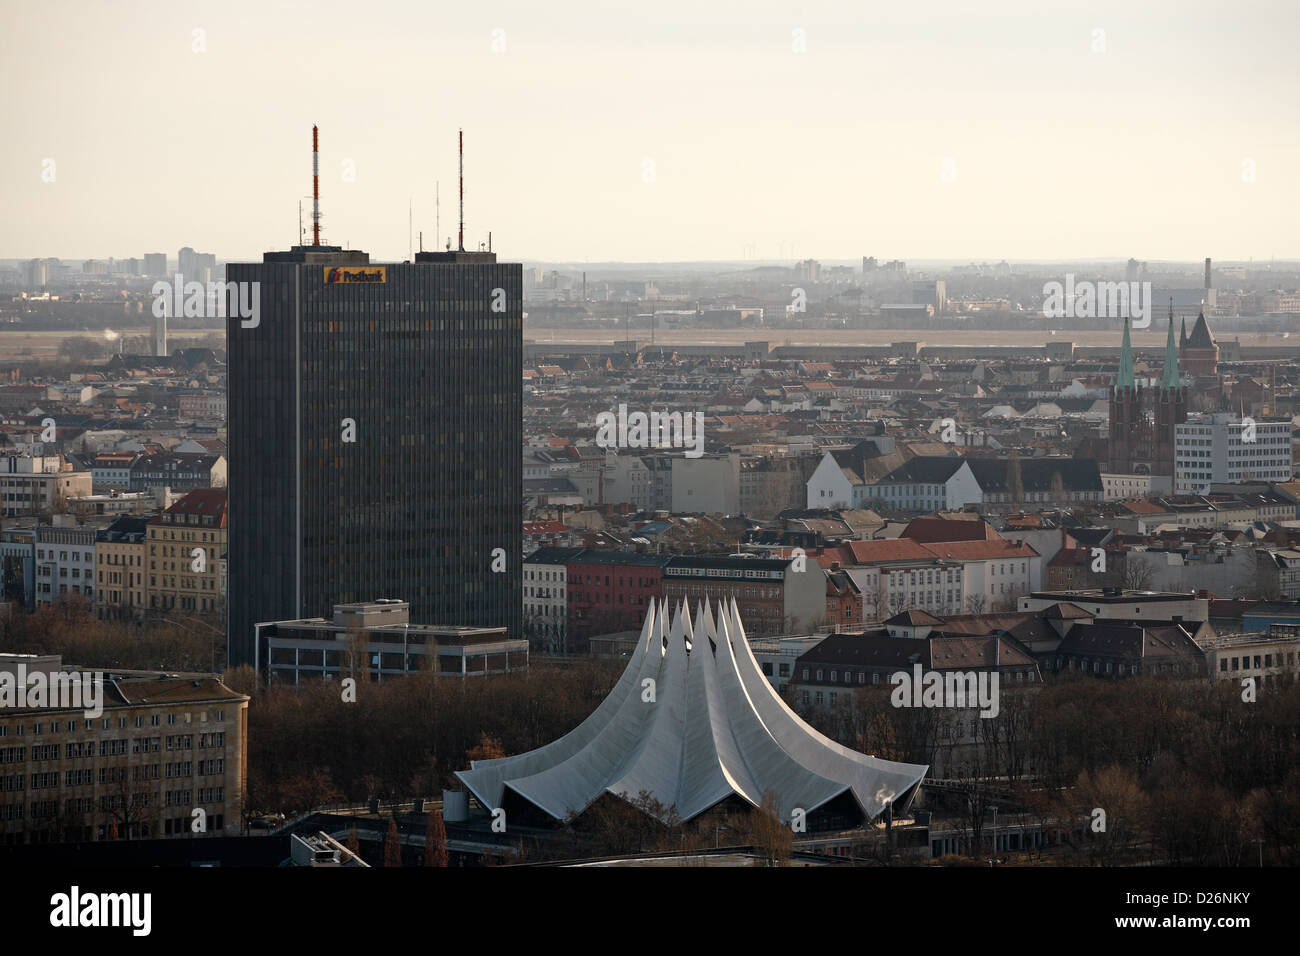 Berlin, Germany, and the views of the Tempodrom Postbankgebaeude Hallesches Ufer Stock Photo